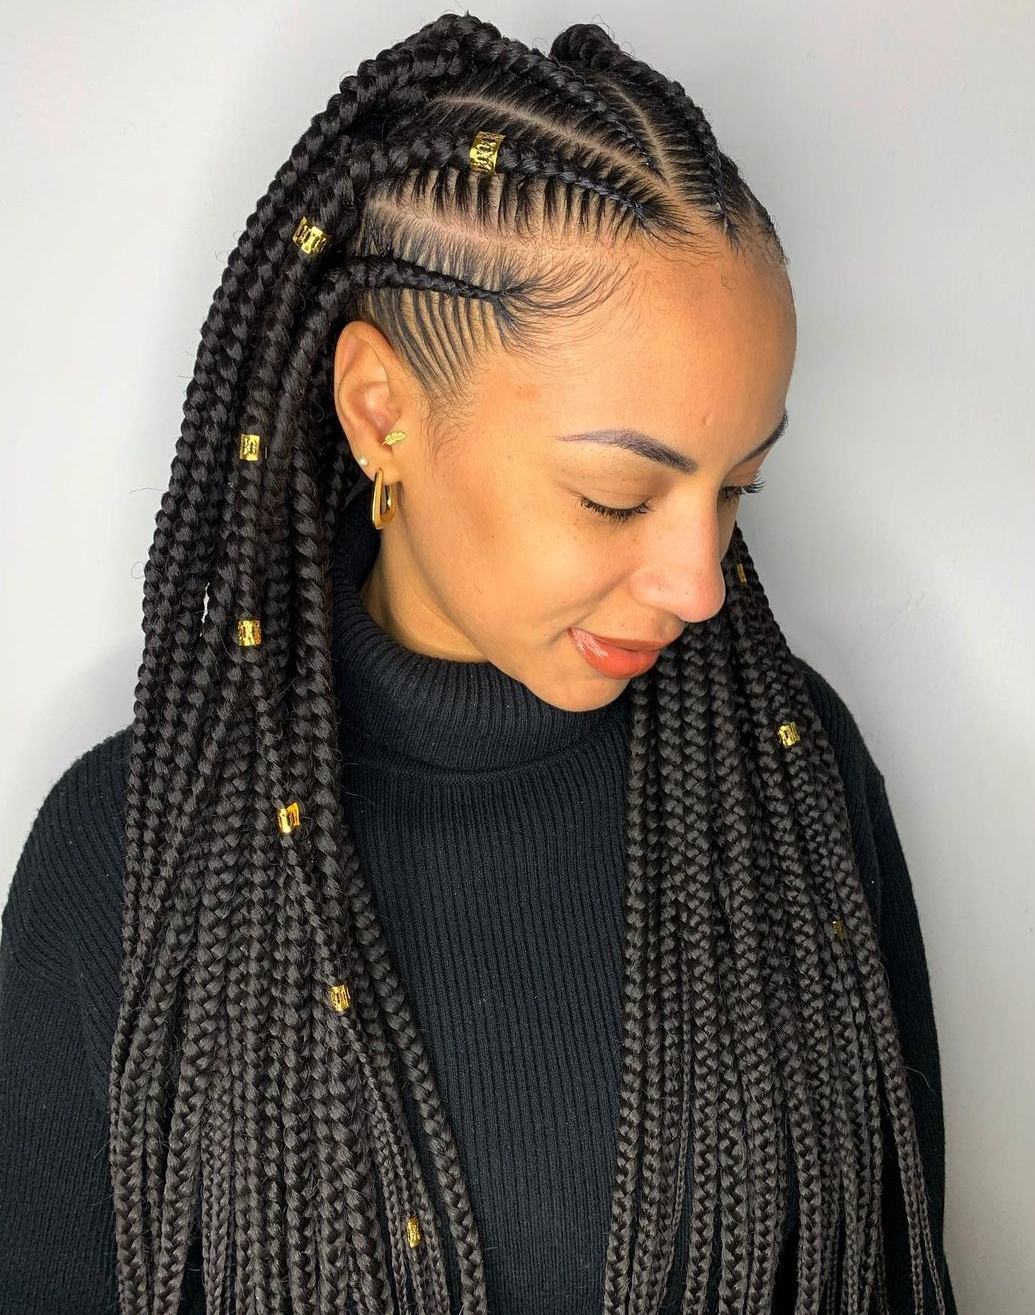 42 Ideas of Stitch Braids for Everyone to Update Your Look